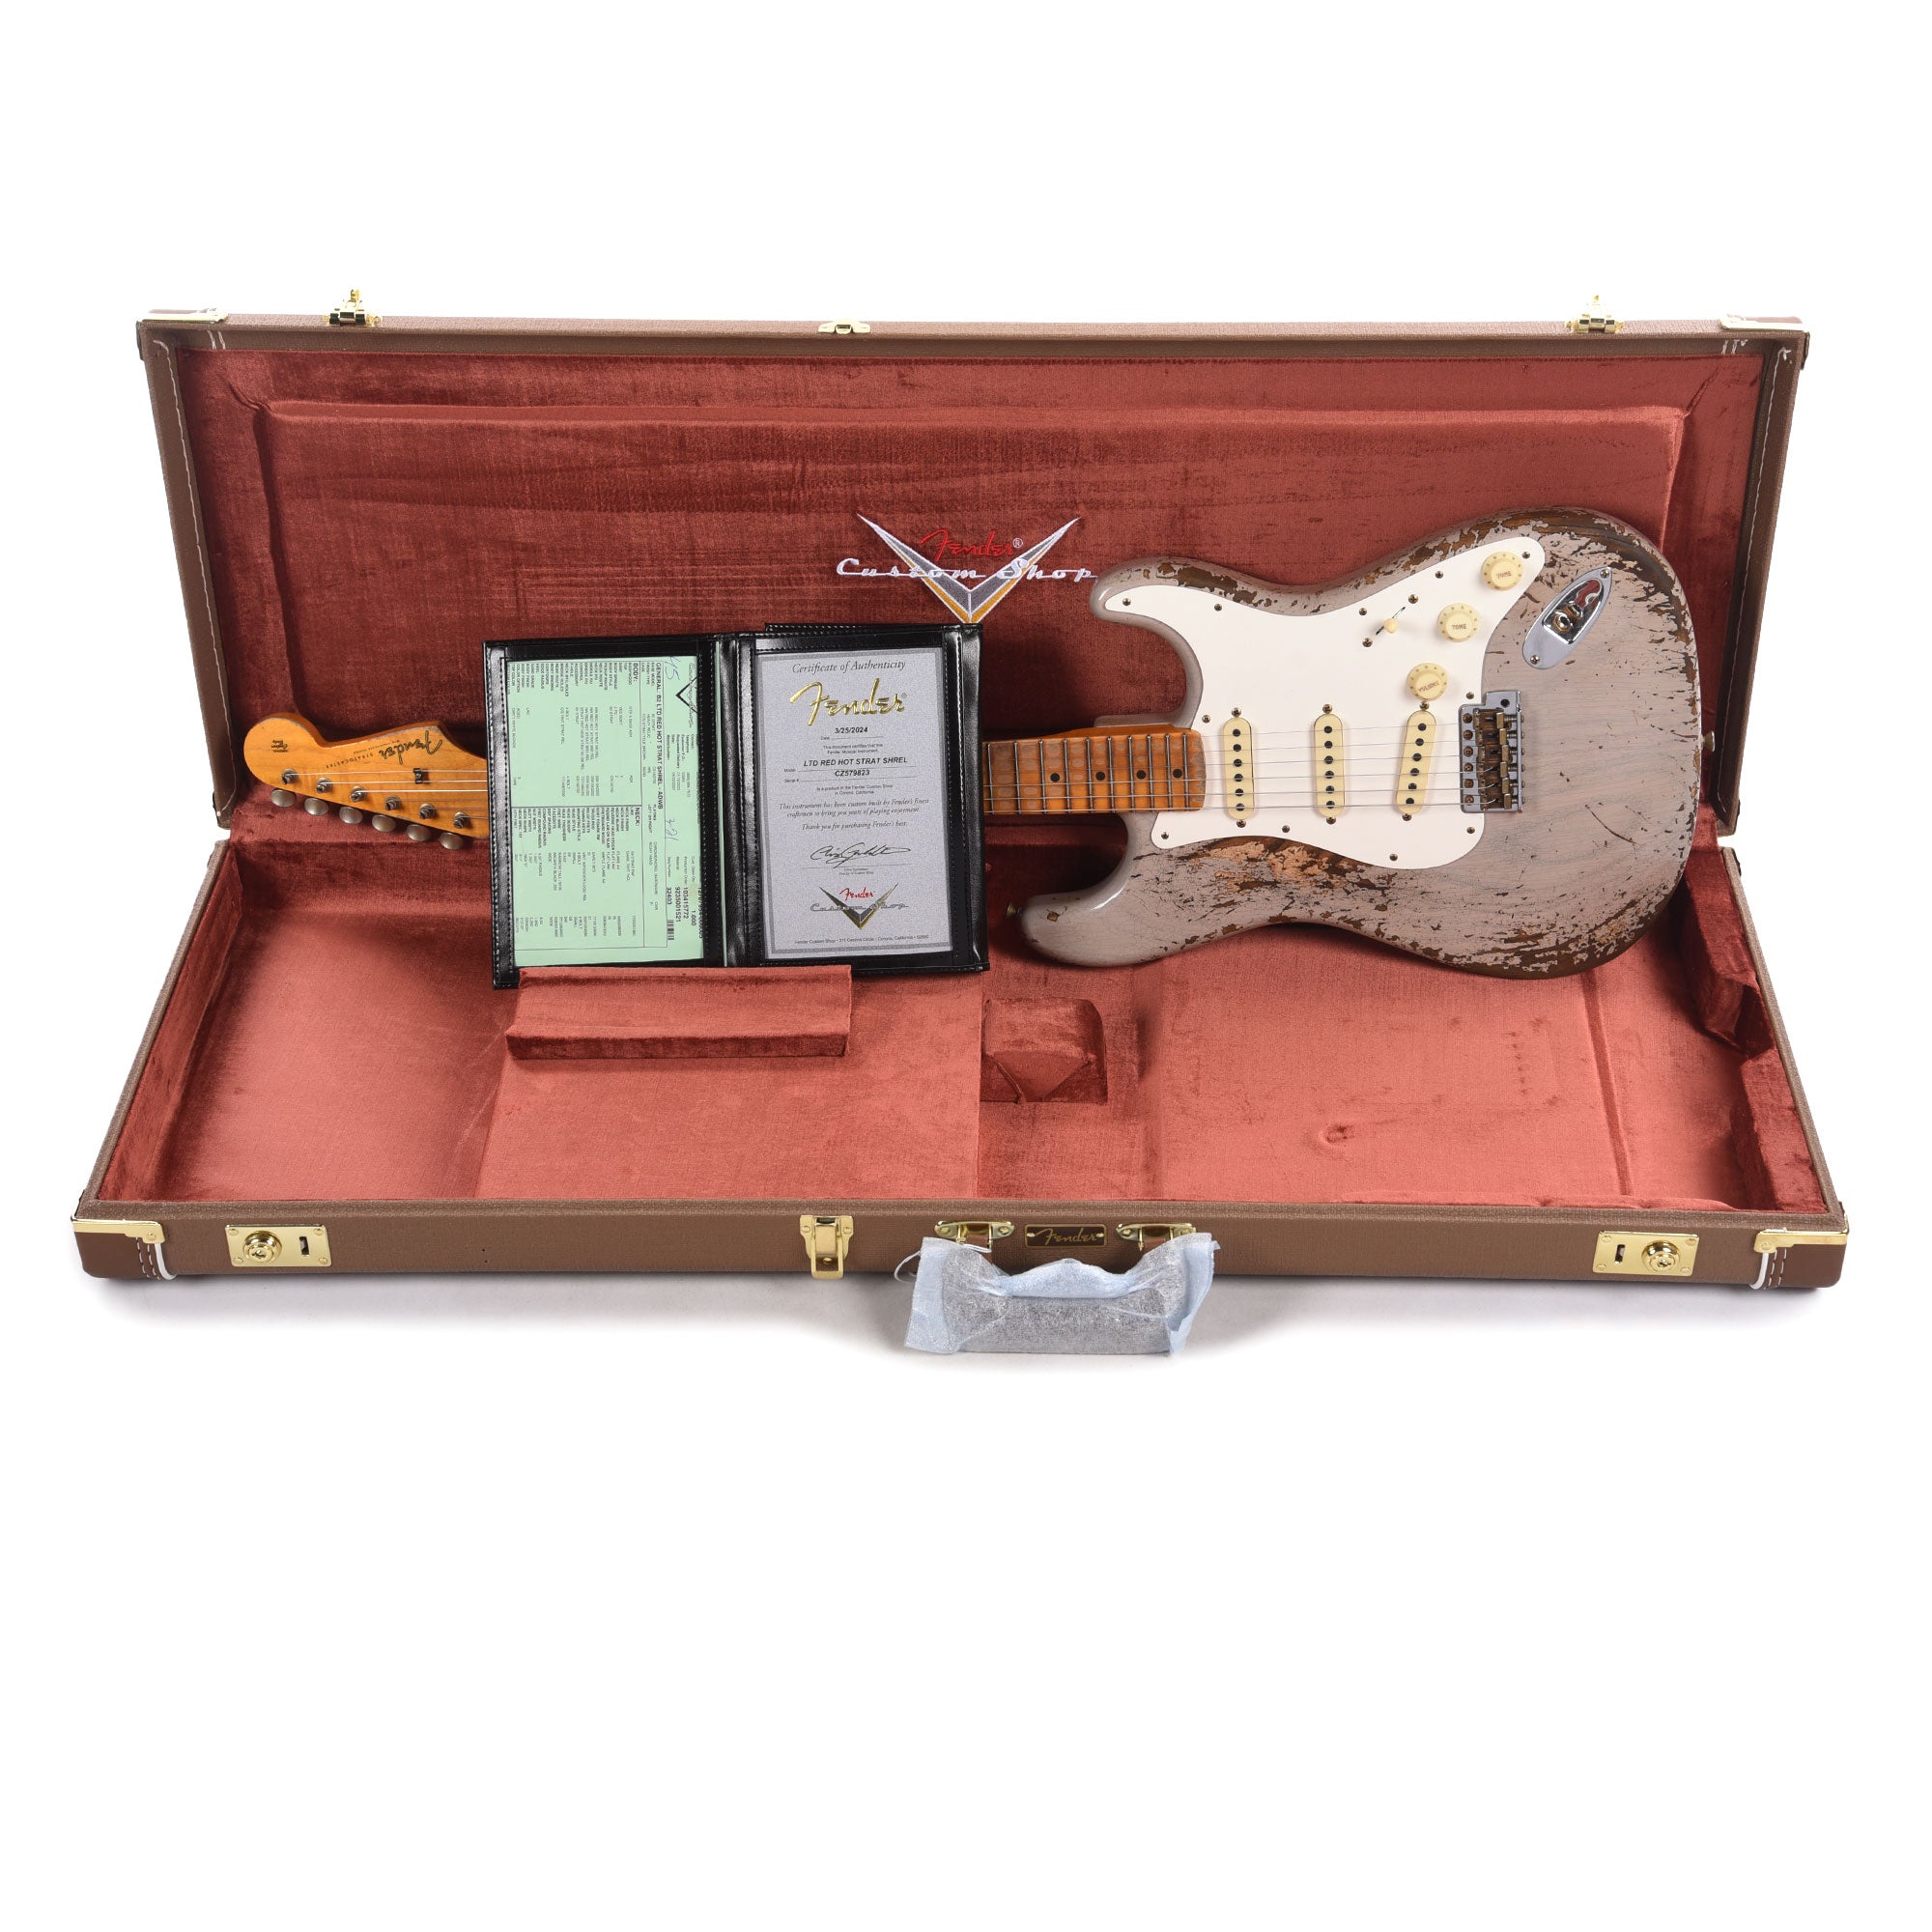 Fender Custom Shop Limited Edition Red Hot Stratocaster Super Heavy Relic Aged Dirty White Blonde